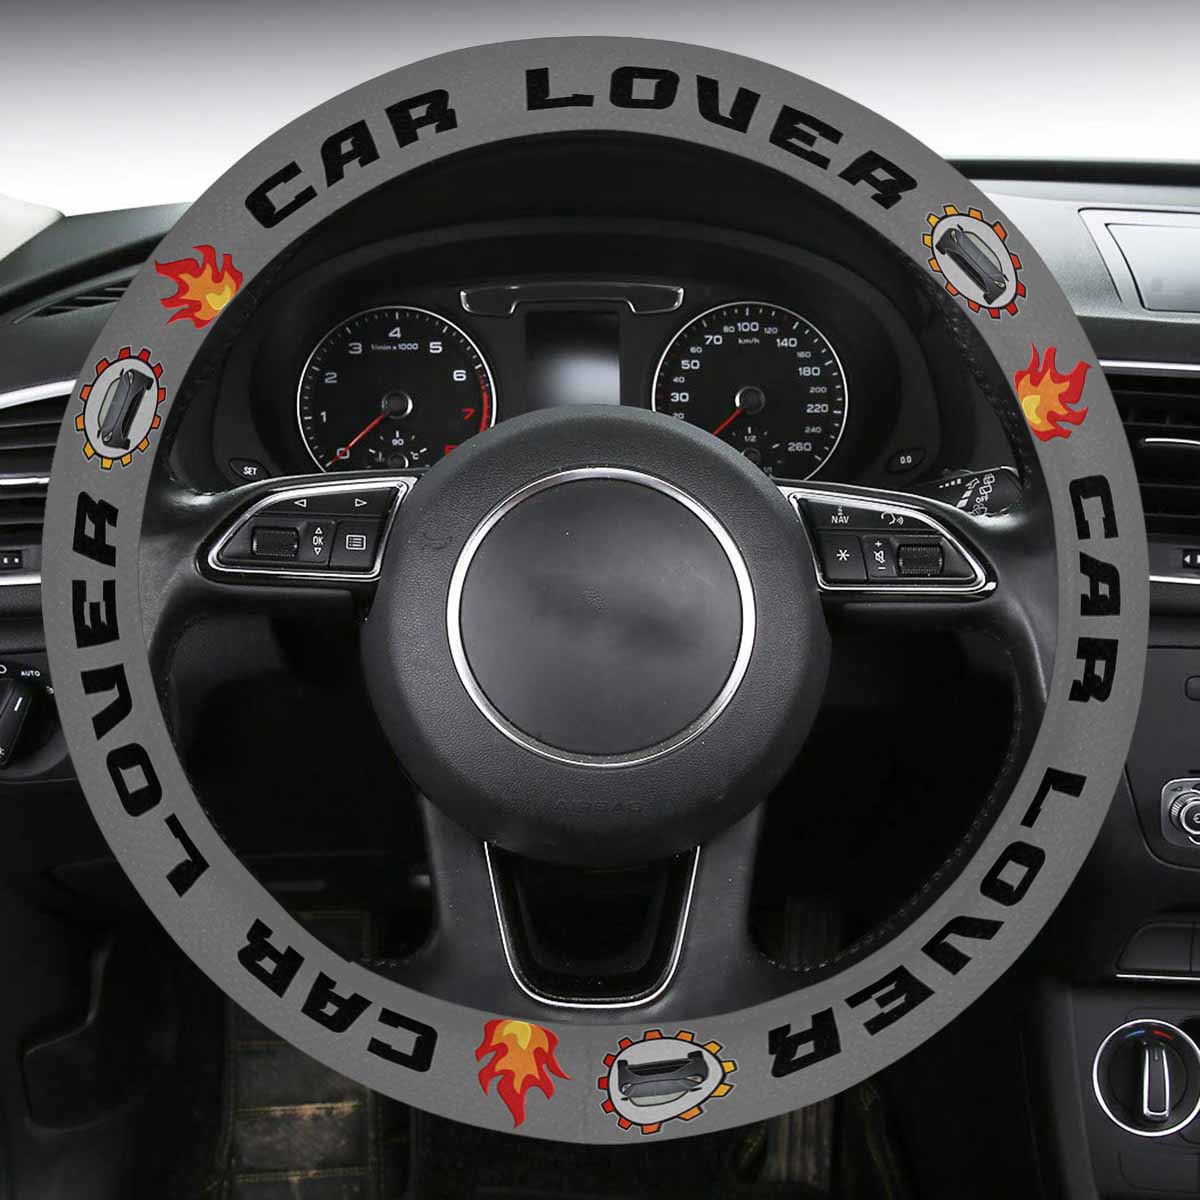 Book Lover Steering Wheel Cover with Anti-Slip Insert – Autozendy